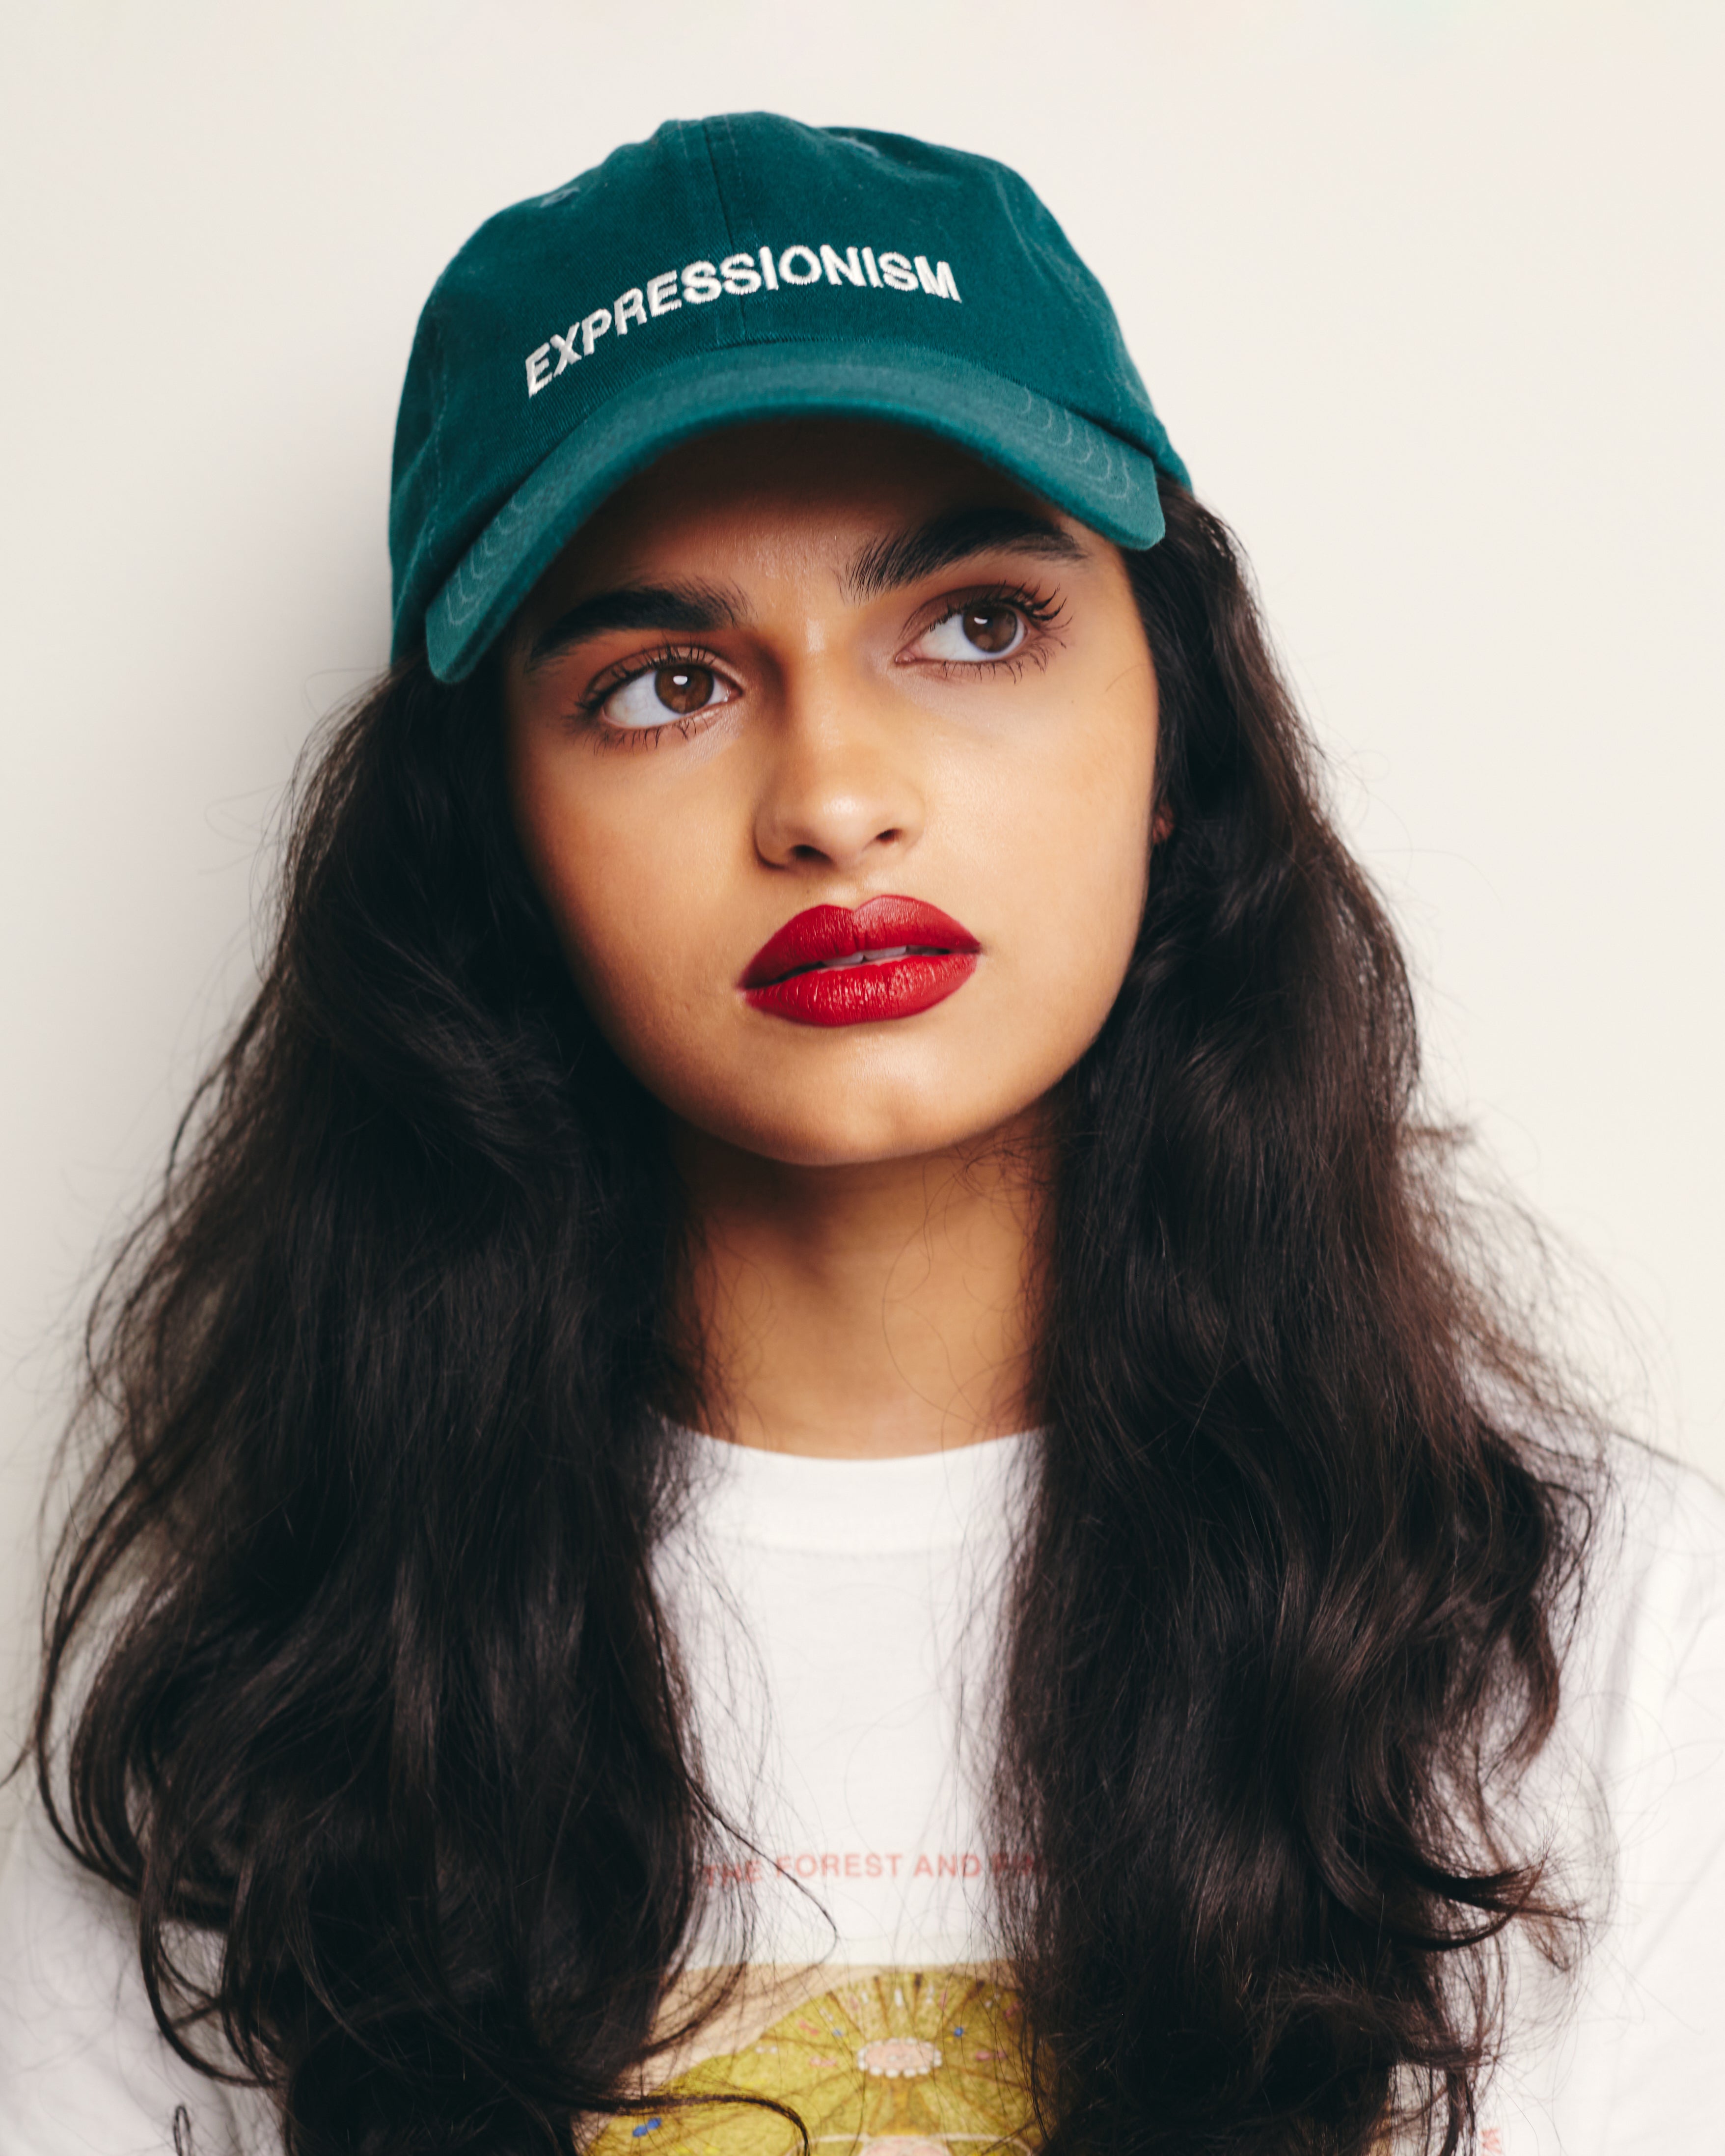 Mira Bhat wears Green Baseball Cap / Dad Hat with Expressionism Art Movement Text Embroidery on Front. 100% Cotton.